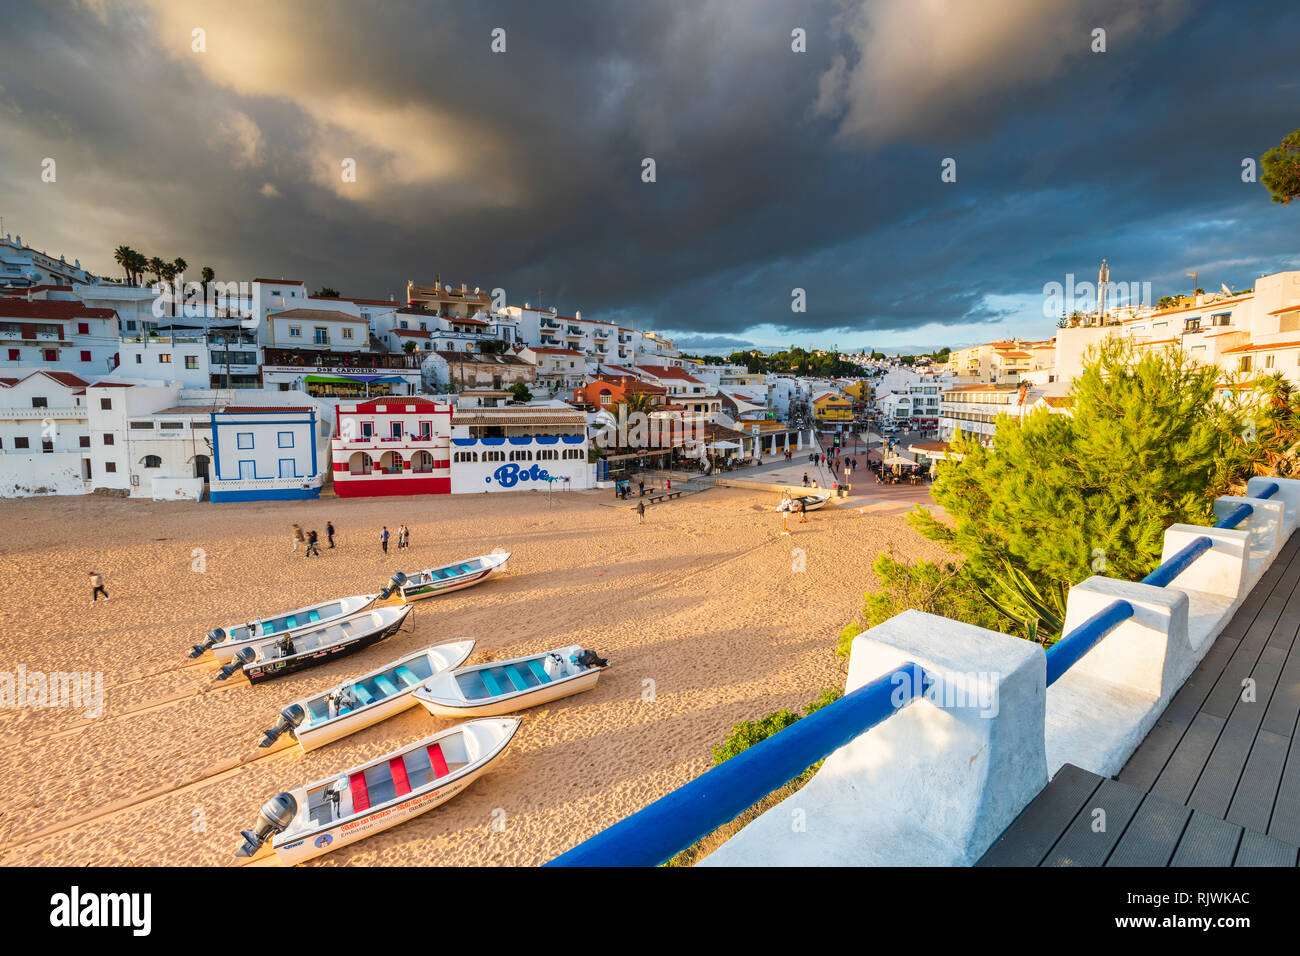 Boats on sandy beach by village of Carvoeiro, Algarve, Portugal, Europe Stock Photo